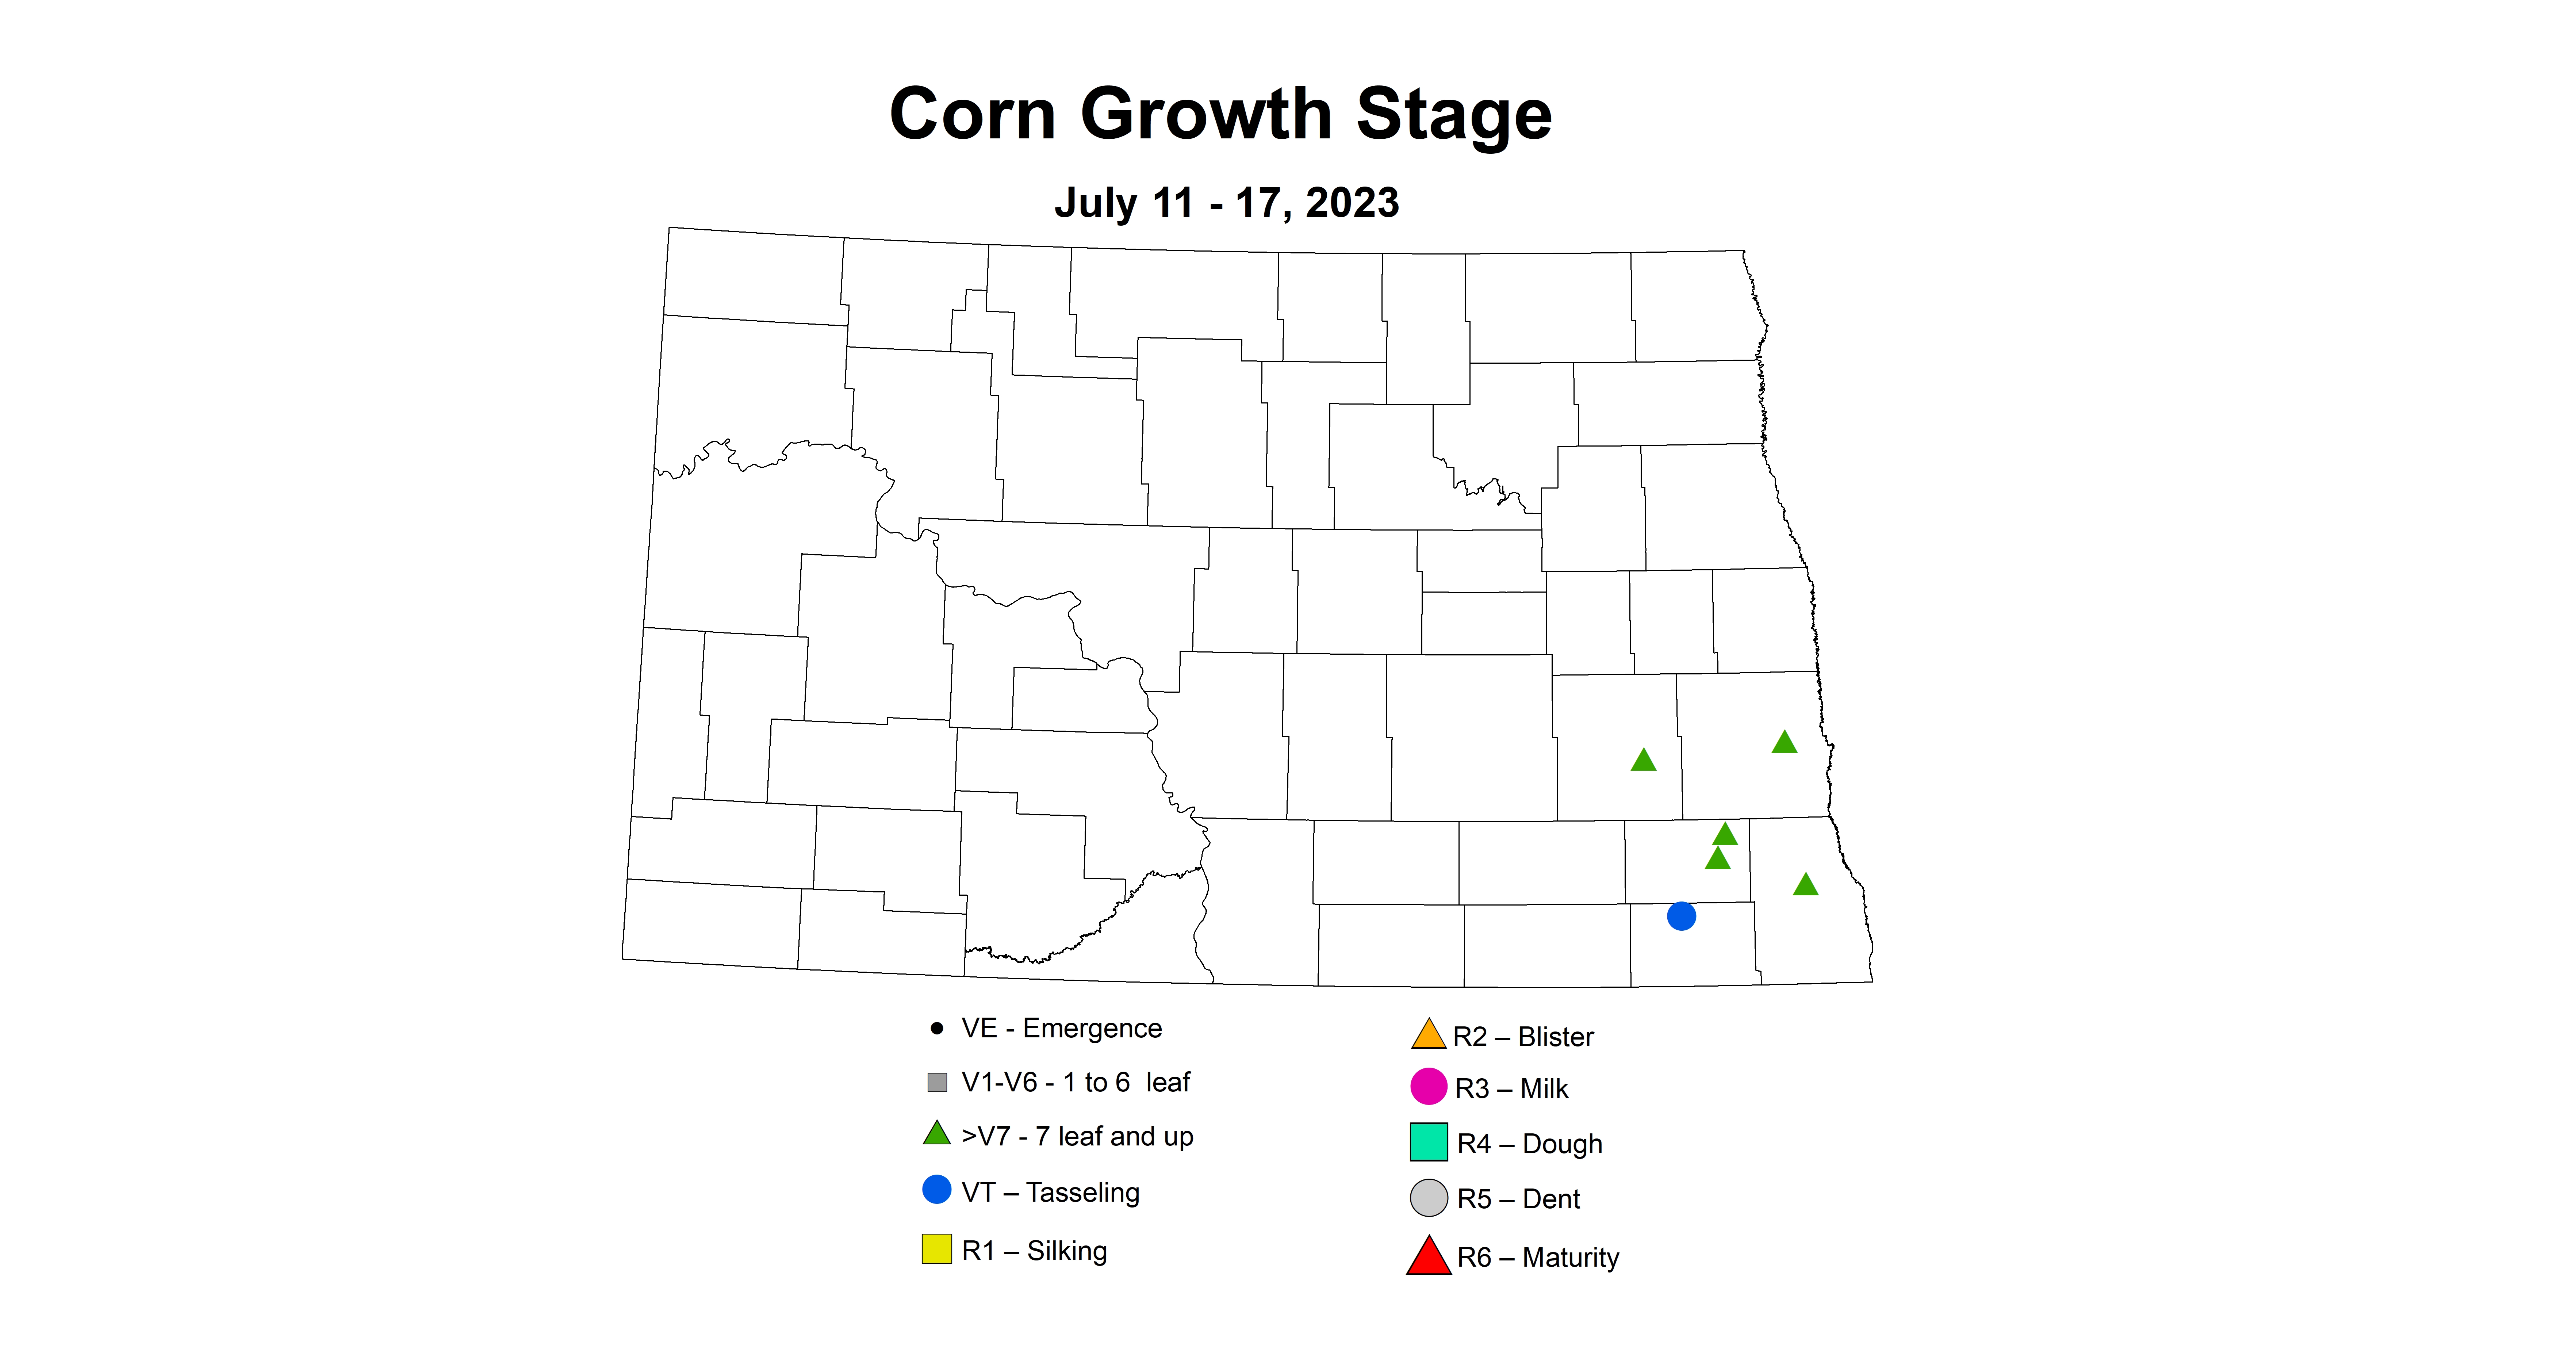 corn growth stages 7.11-7.17 2023